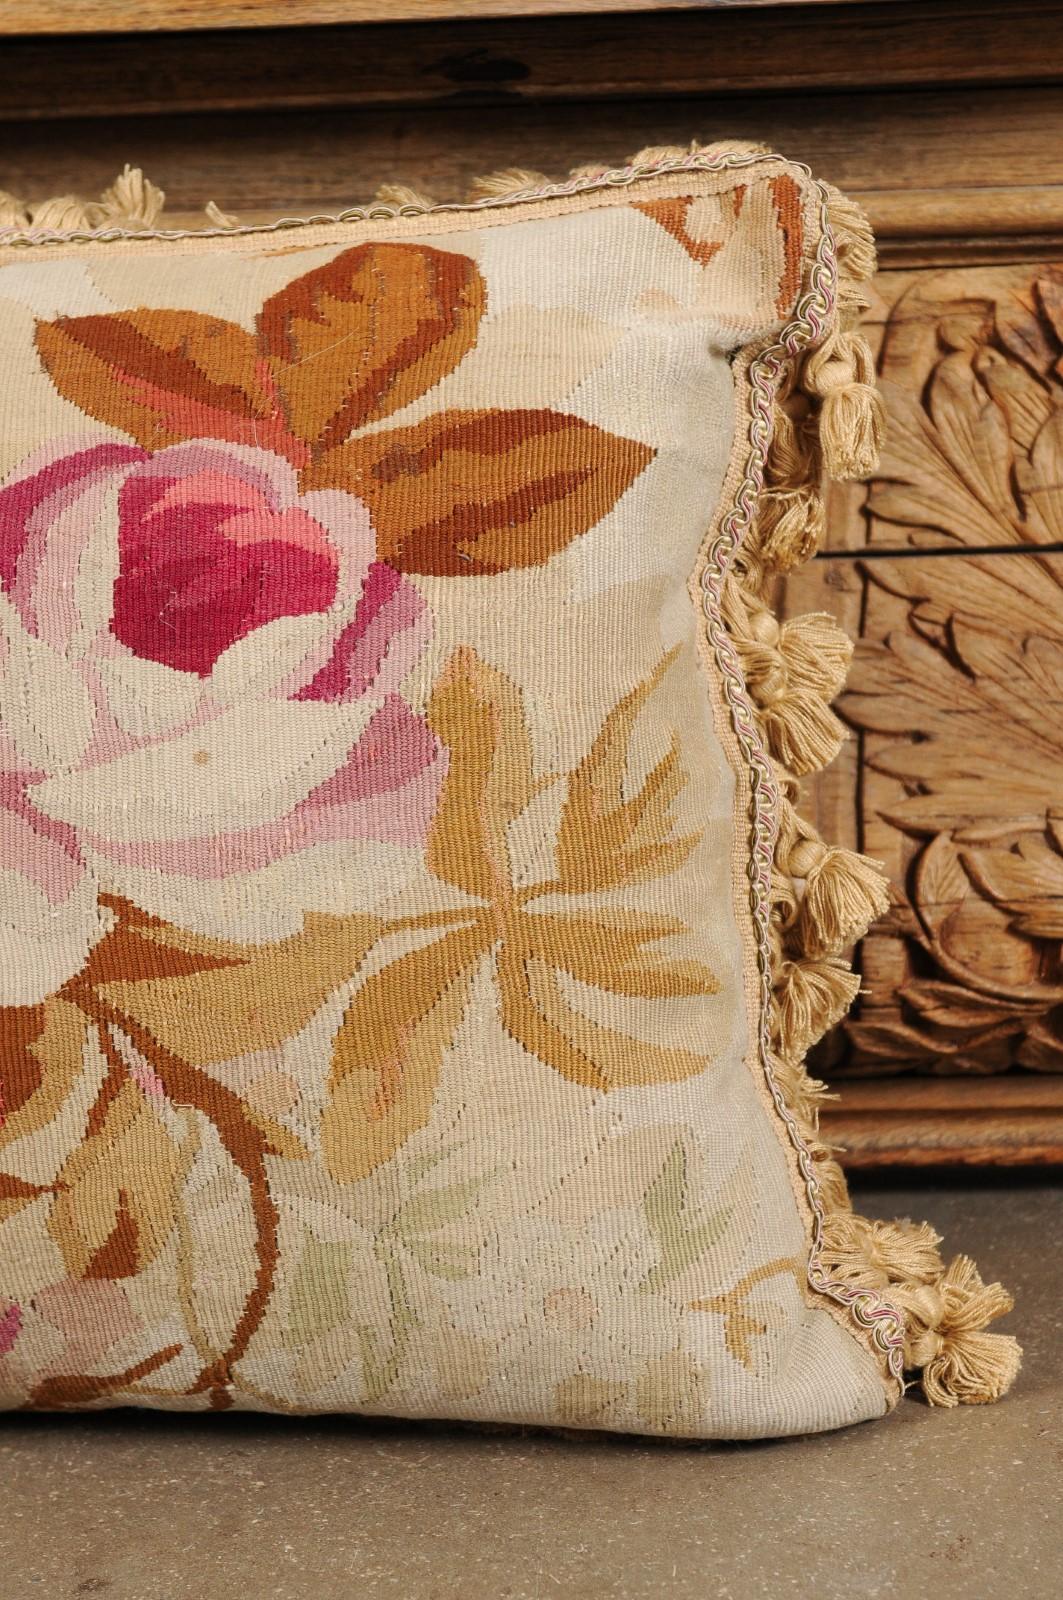 19th Century French Aubusson Woven Tapestry Pillow with Floral Décor and Tassels For Sale 7